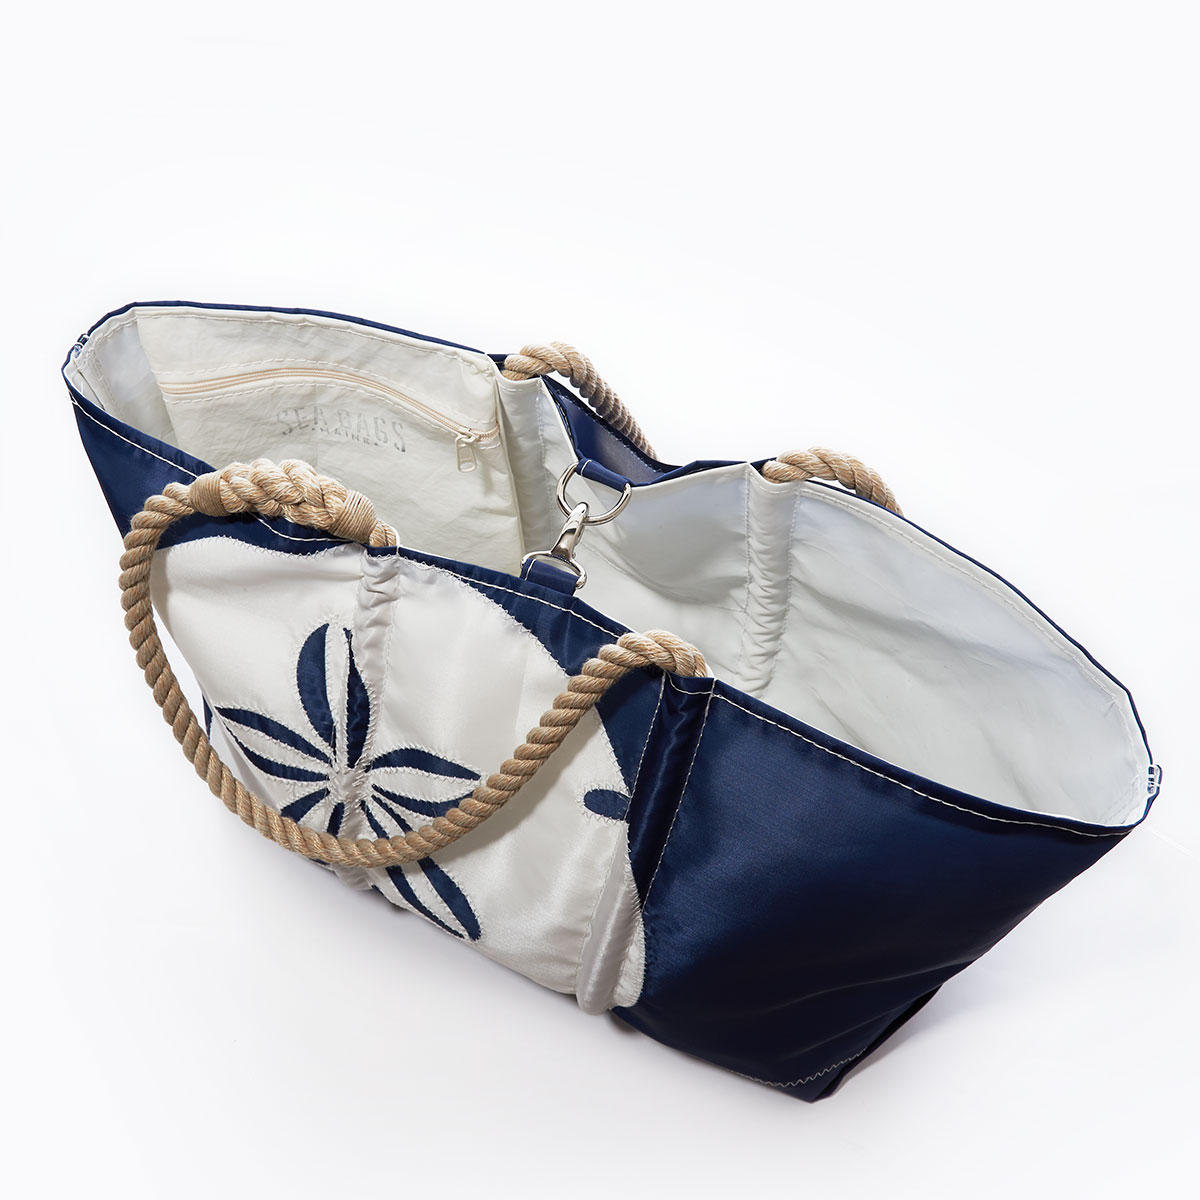 clasp closure of a navy recycled sail cloth ogunquit beach bag with hemp rope handles is embellished with a white sand dollar